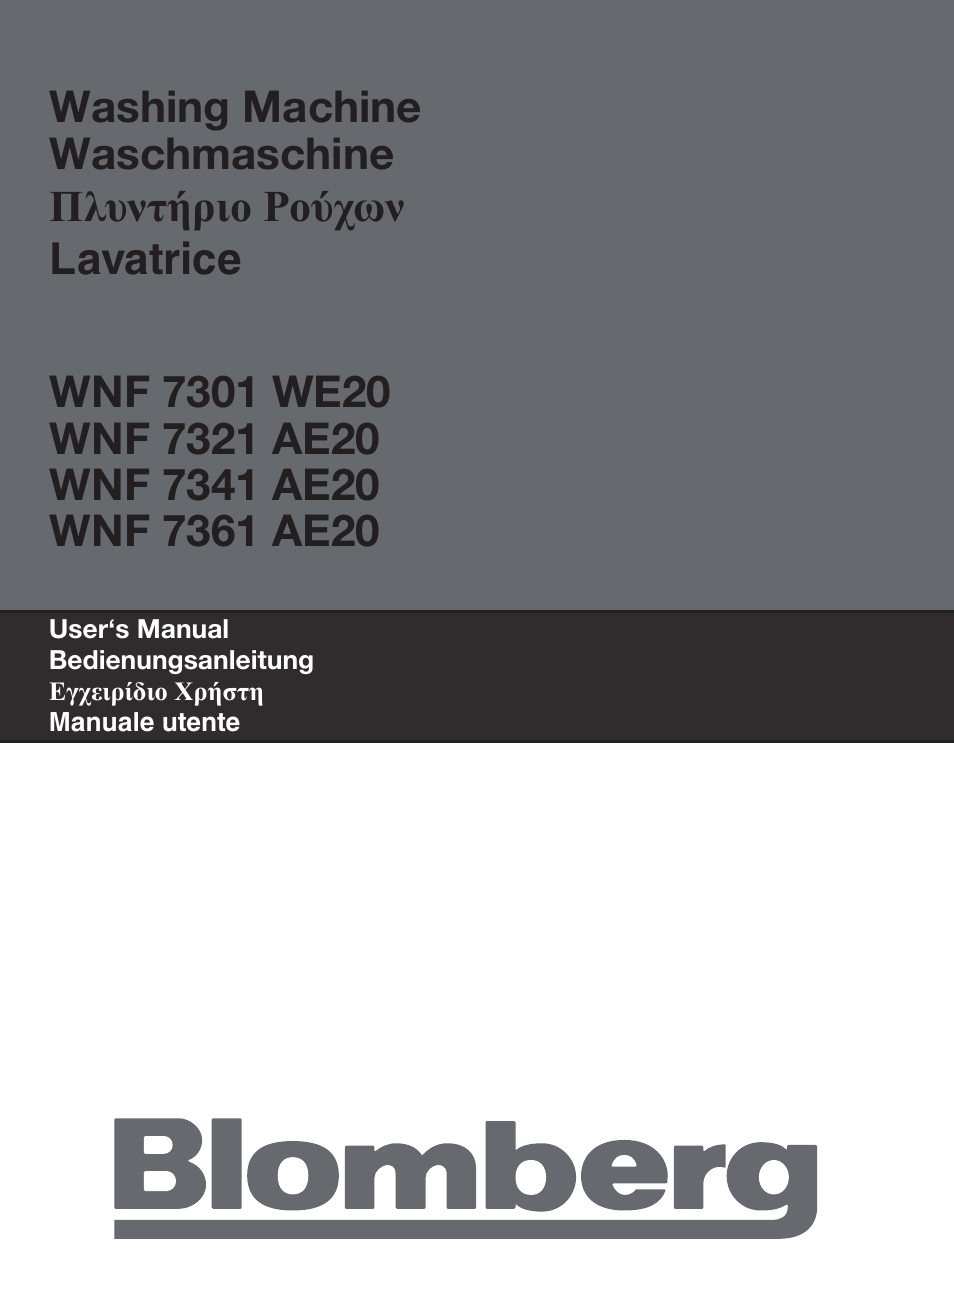 Blomberg WNF 7361 AE20 User Manual | 68 pages | Also for: WNF 7341 AE20,  WNF 7321 AE20, WNF 7301 WE20